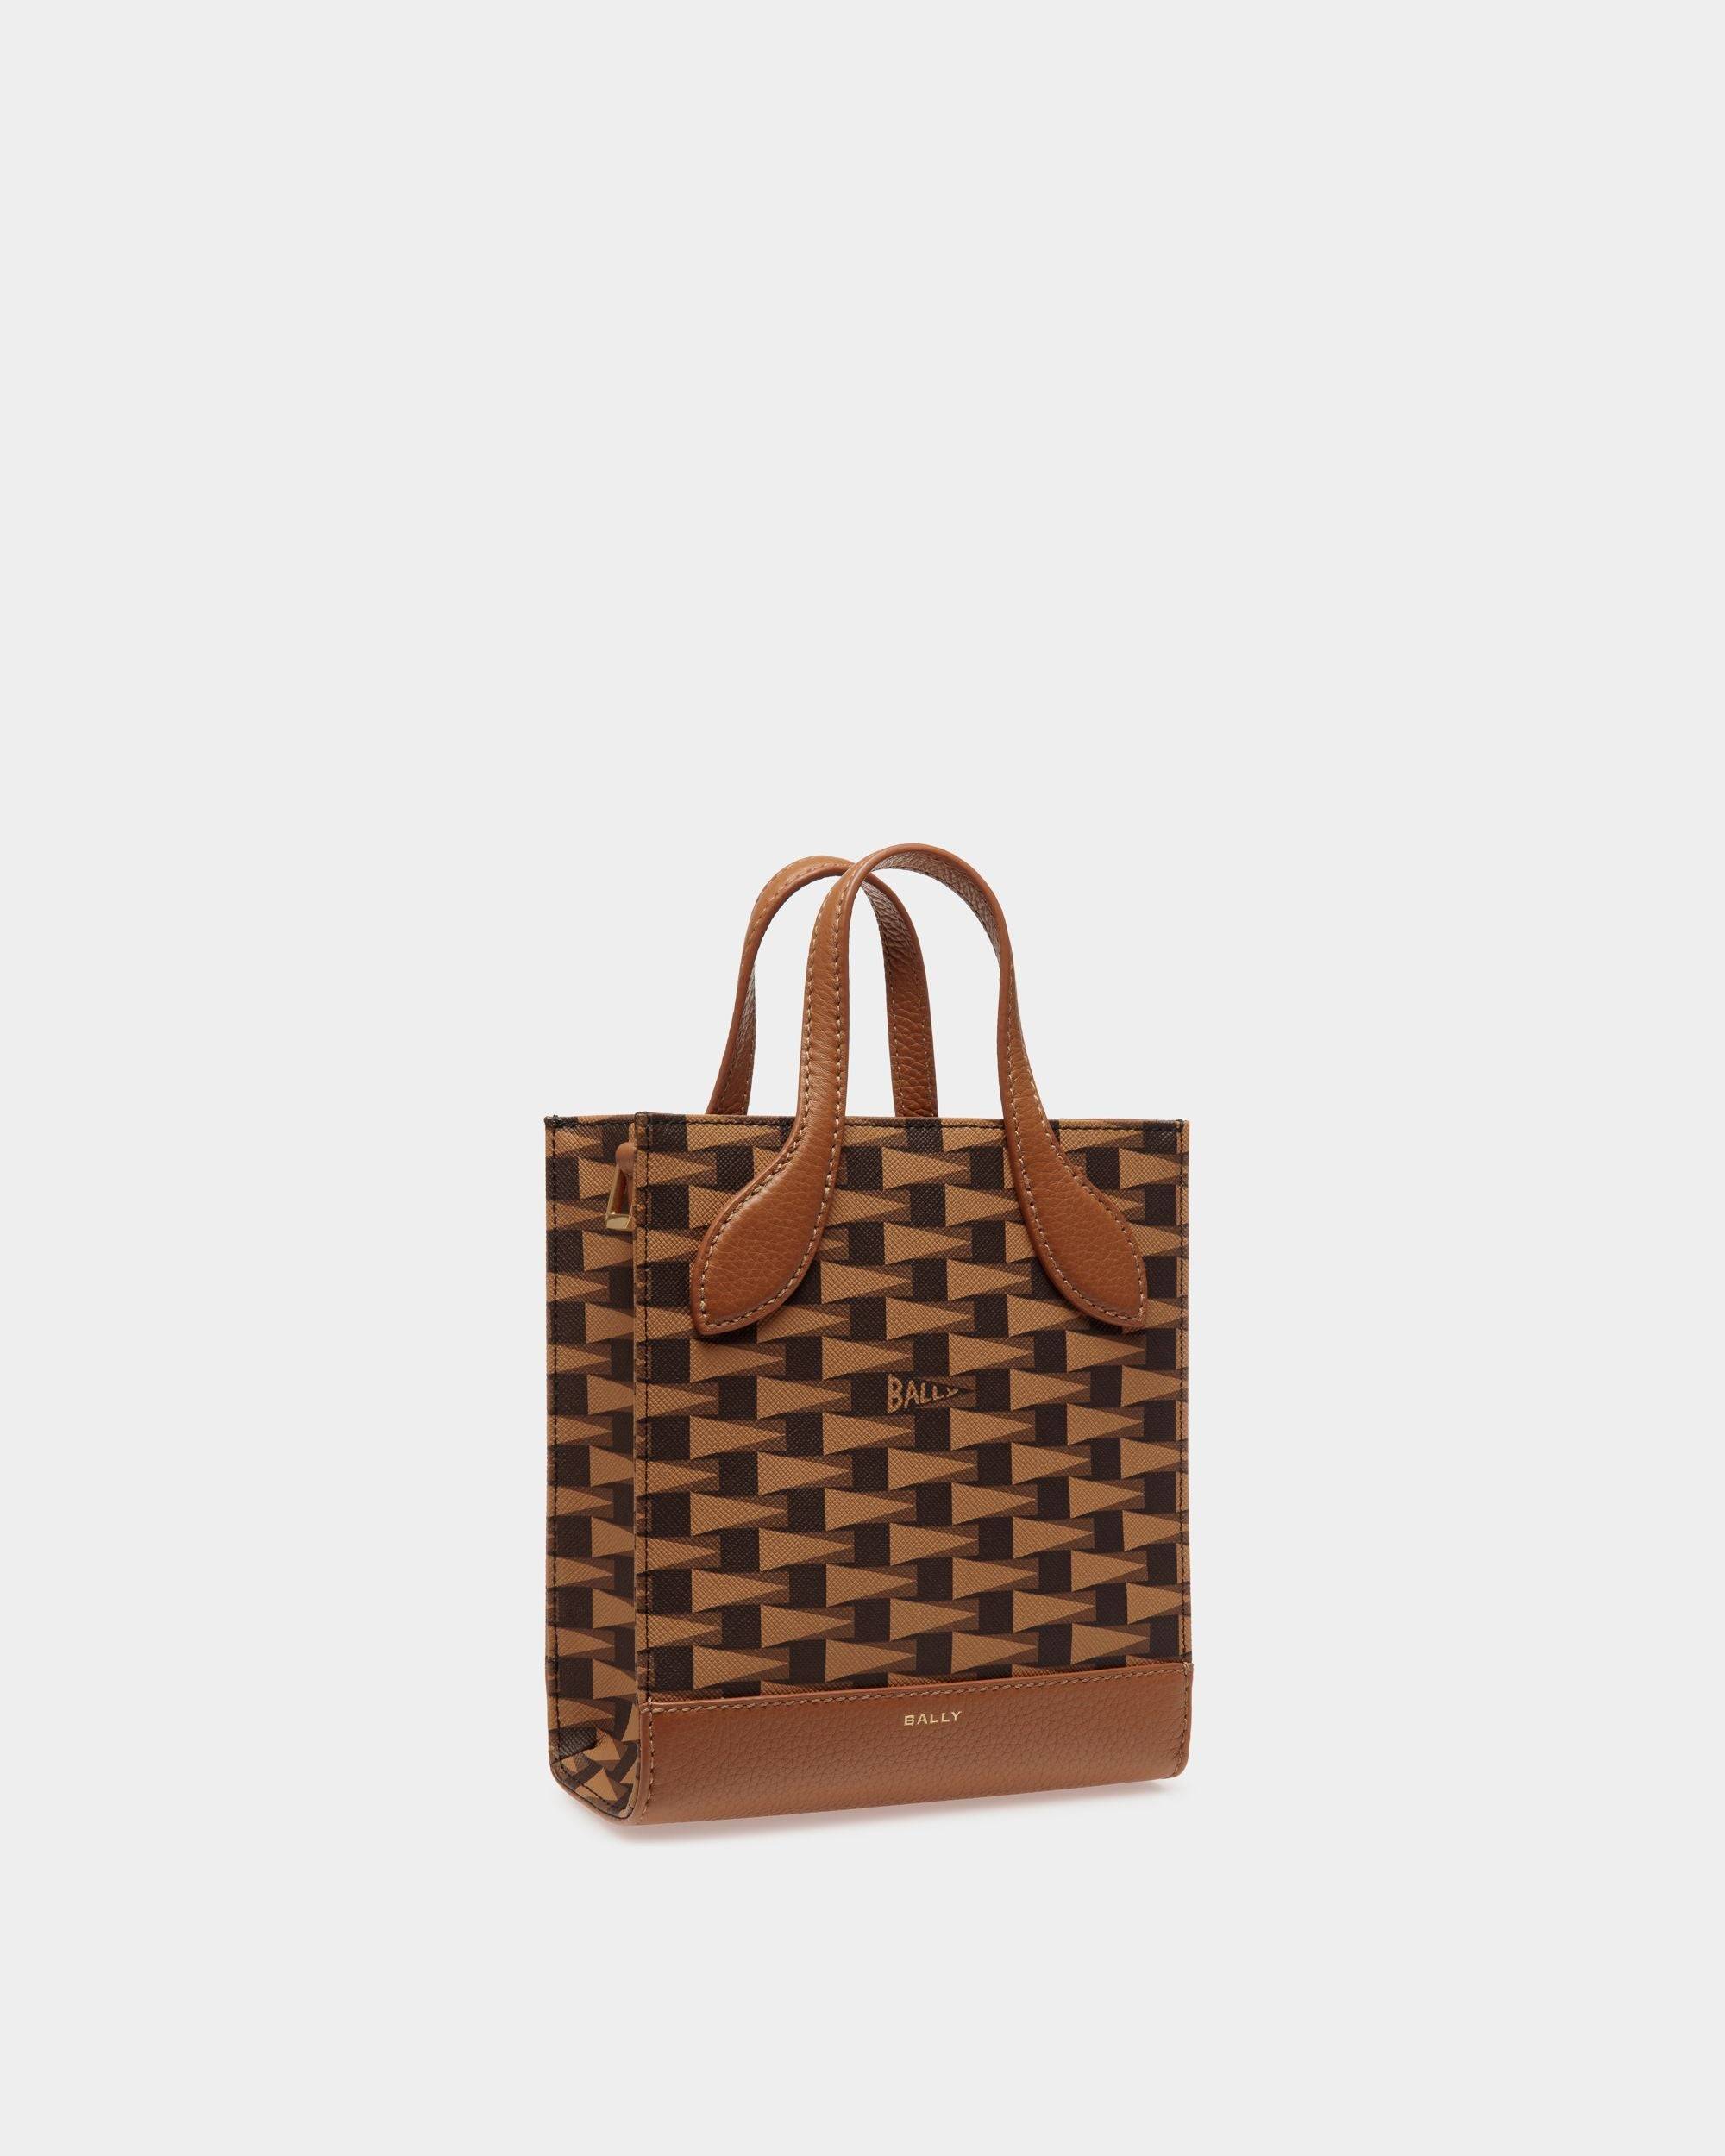 Pennant | Women's Mini Tote Bag in Brown Pennant Motif TPU | Bally | Still Life 3/4 Front